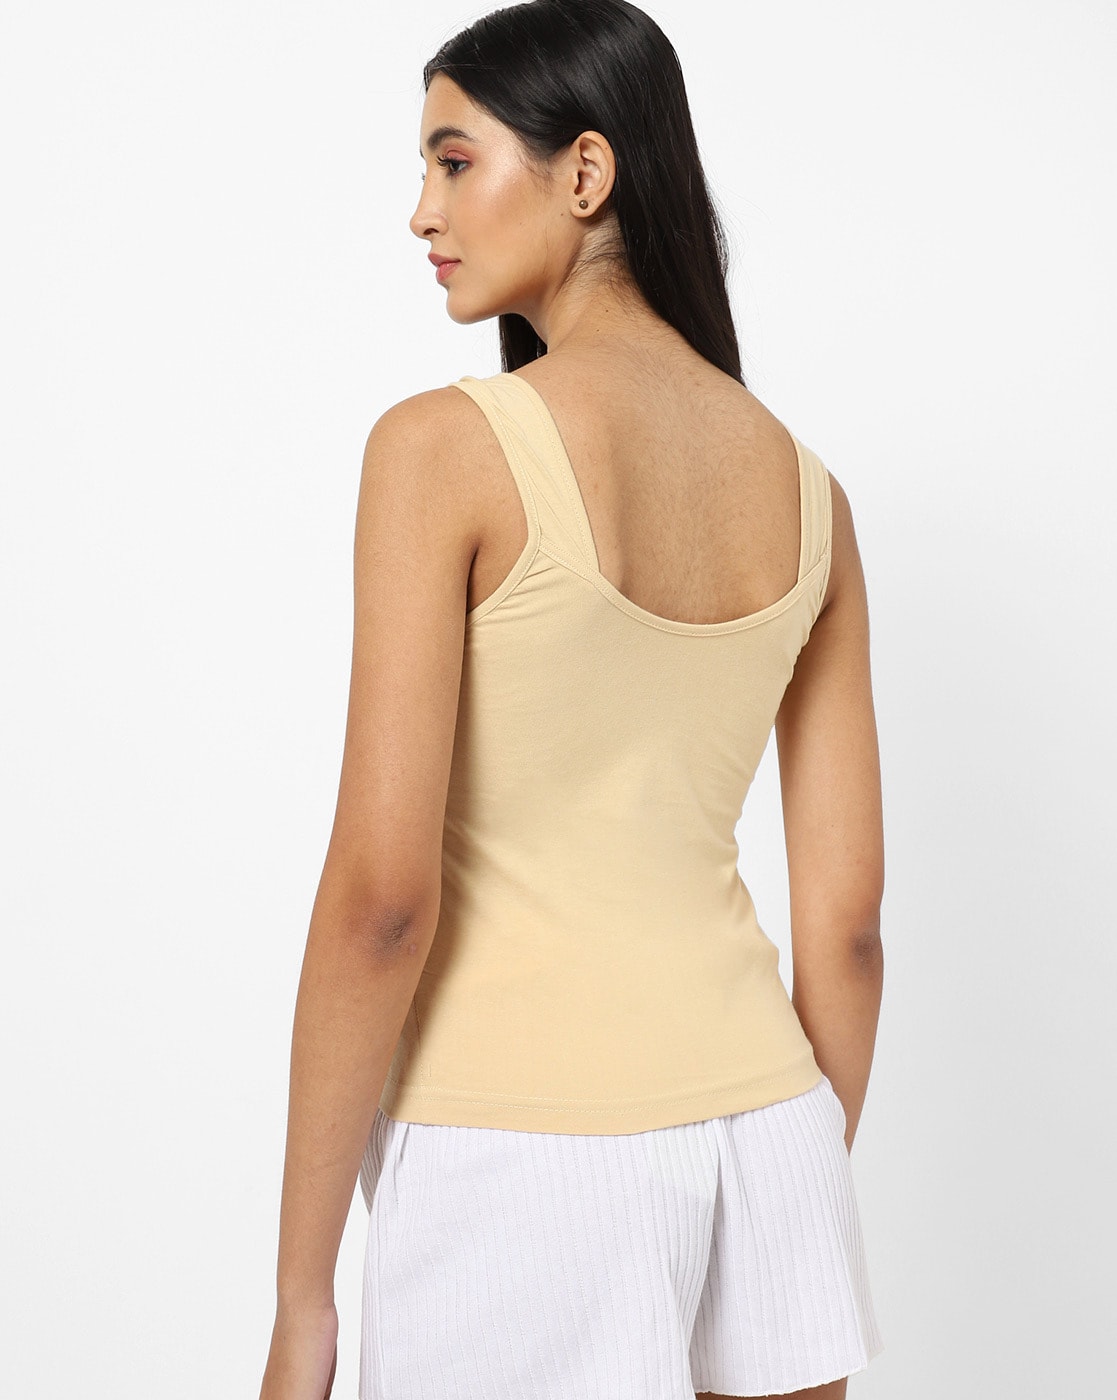 Buy Nude Camisoles & Slips for Women by Floret Online